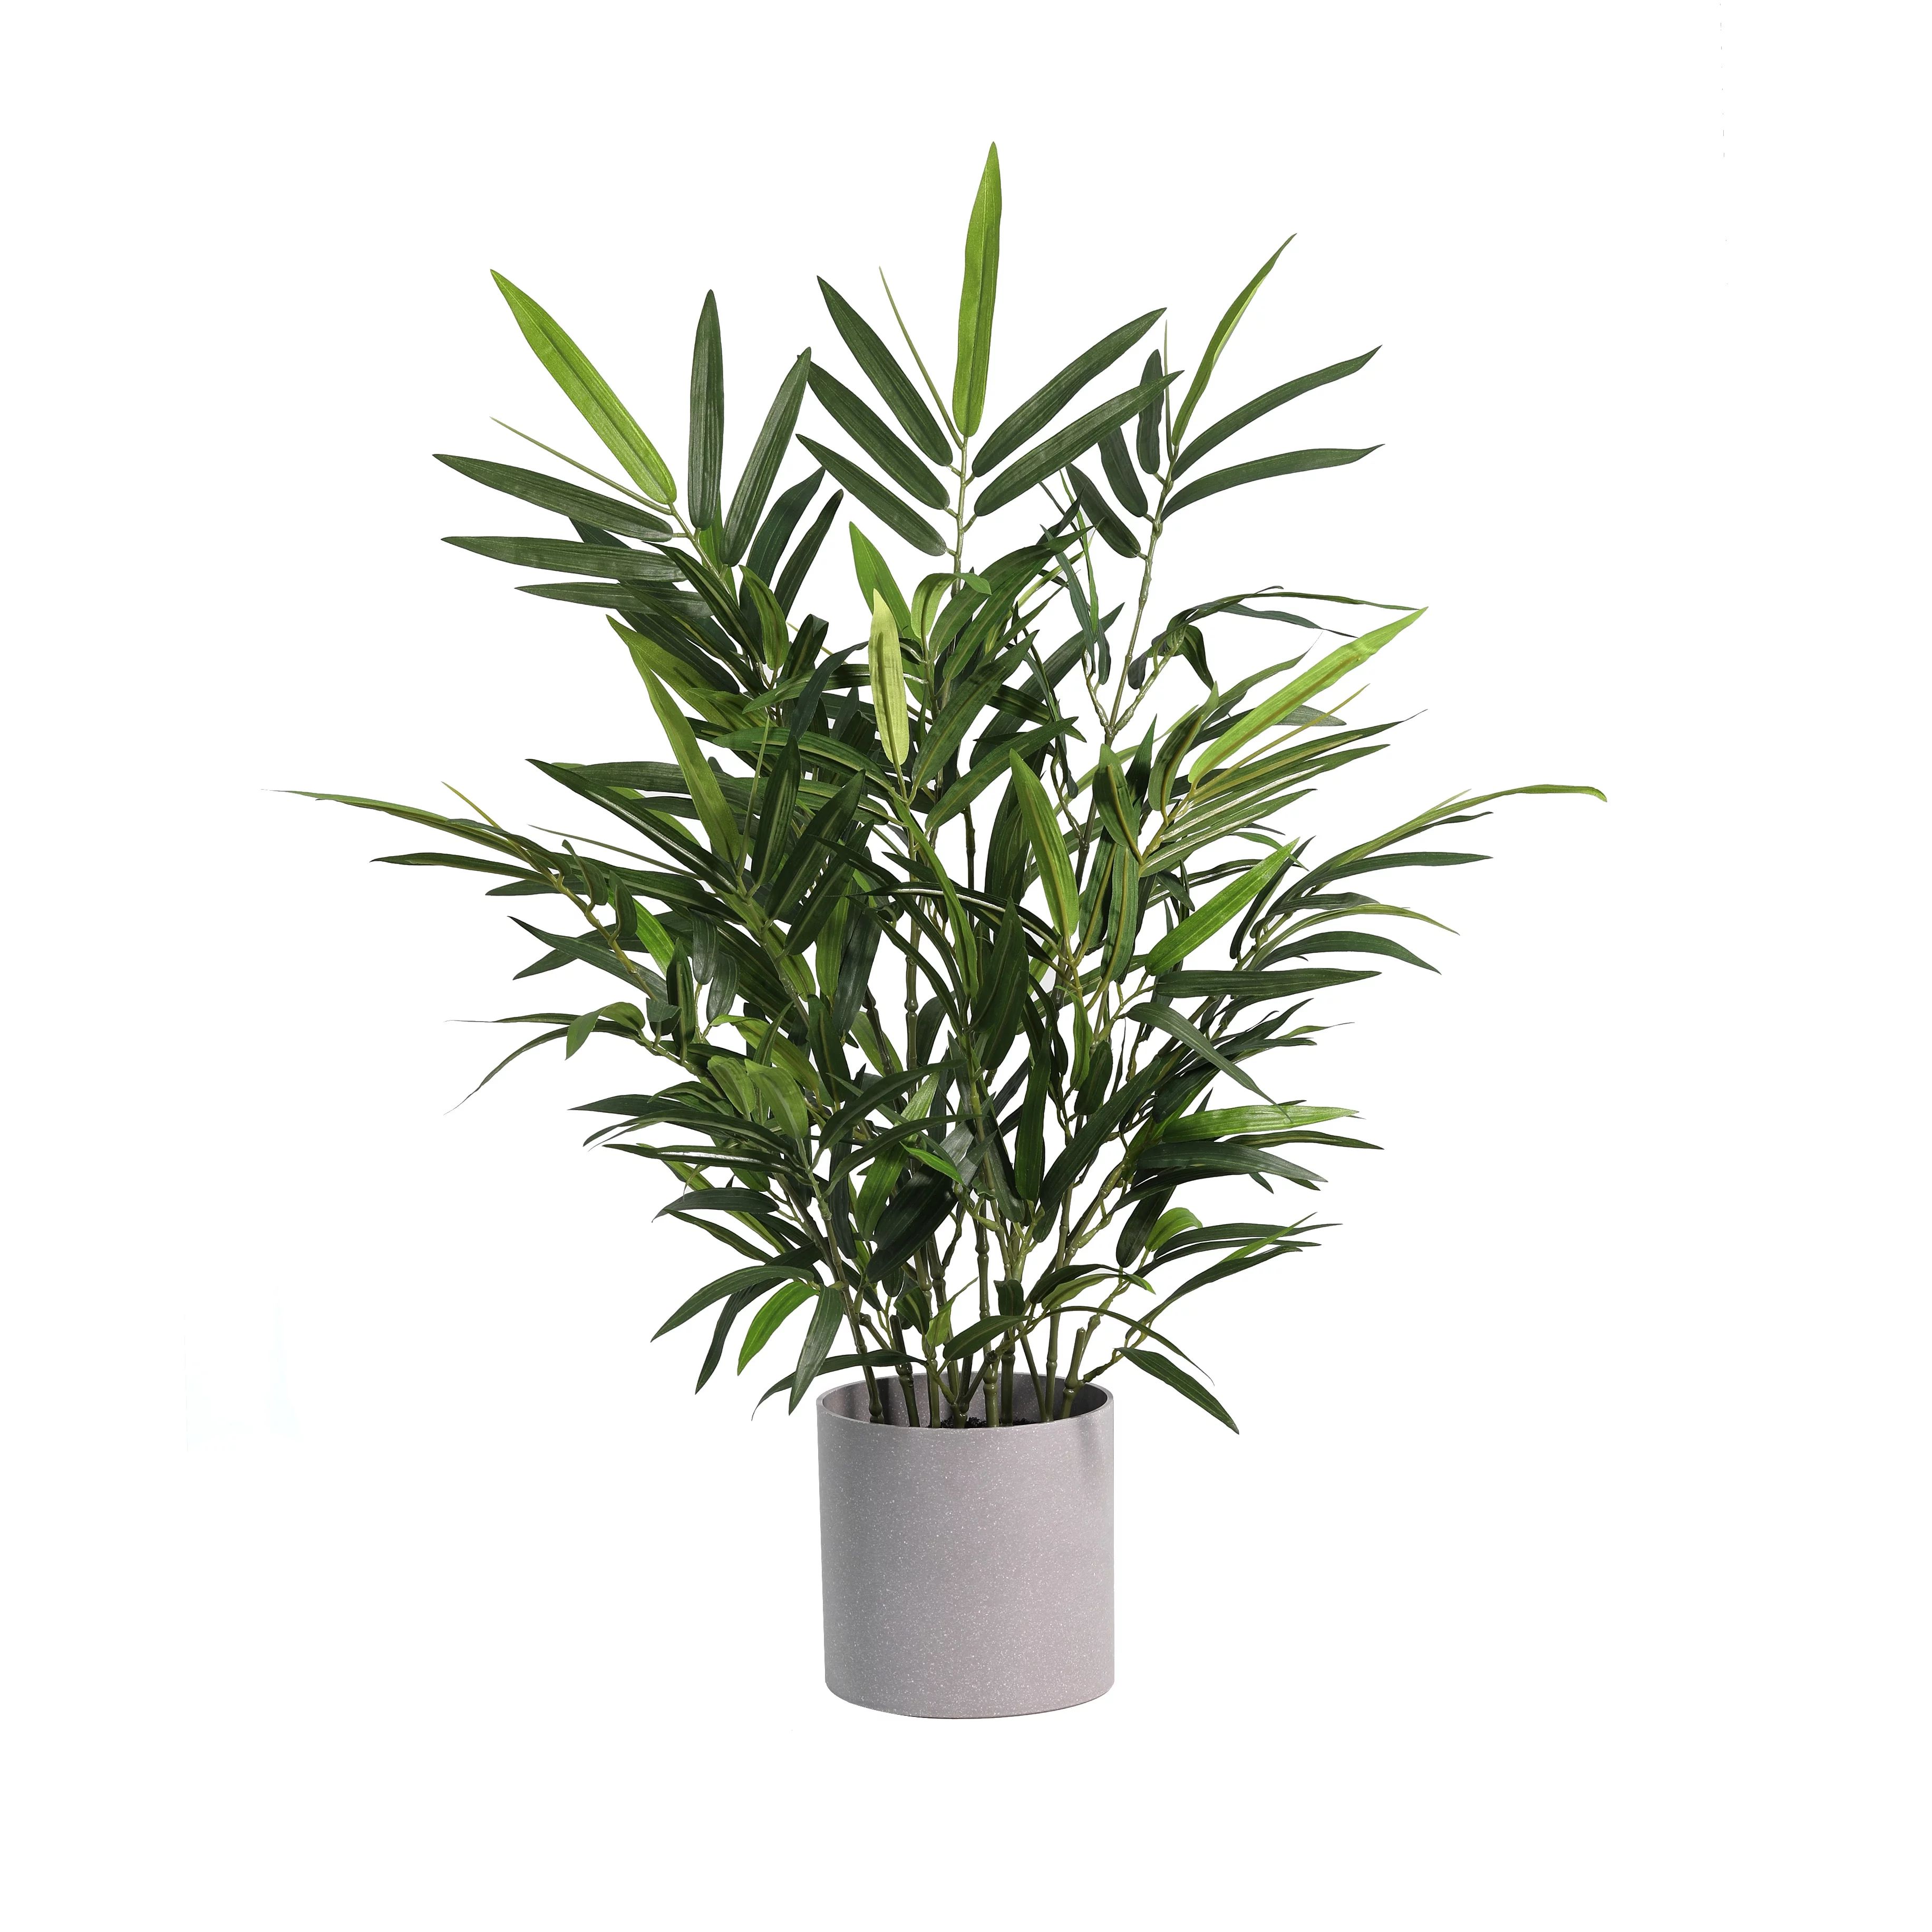 Mainstays 30" Artificial Potted Plant in Green, Bamboo Grey Melamine Pot | Walmart (US)